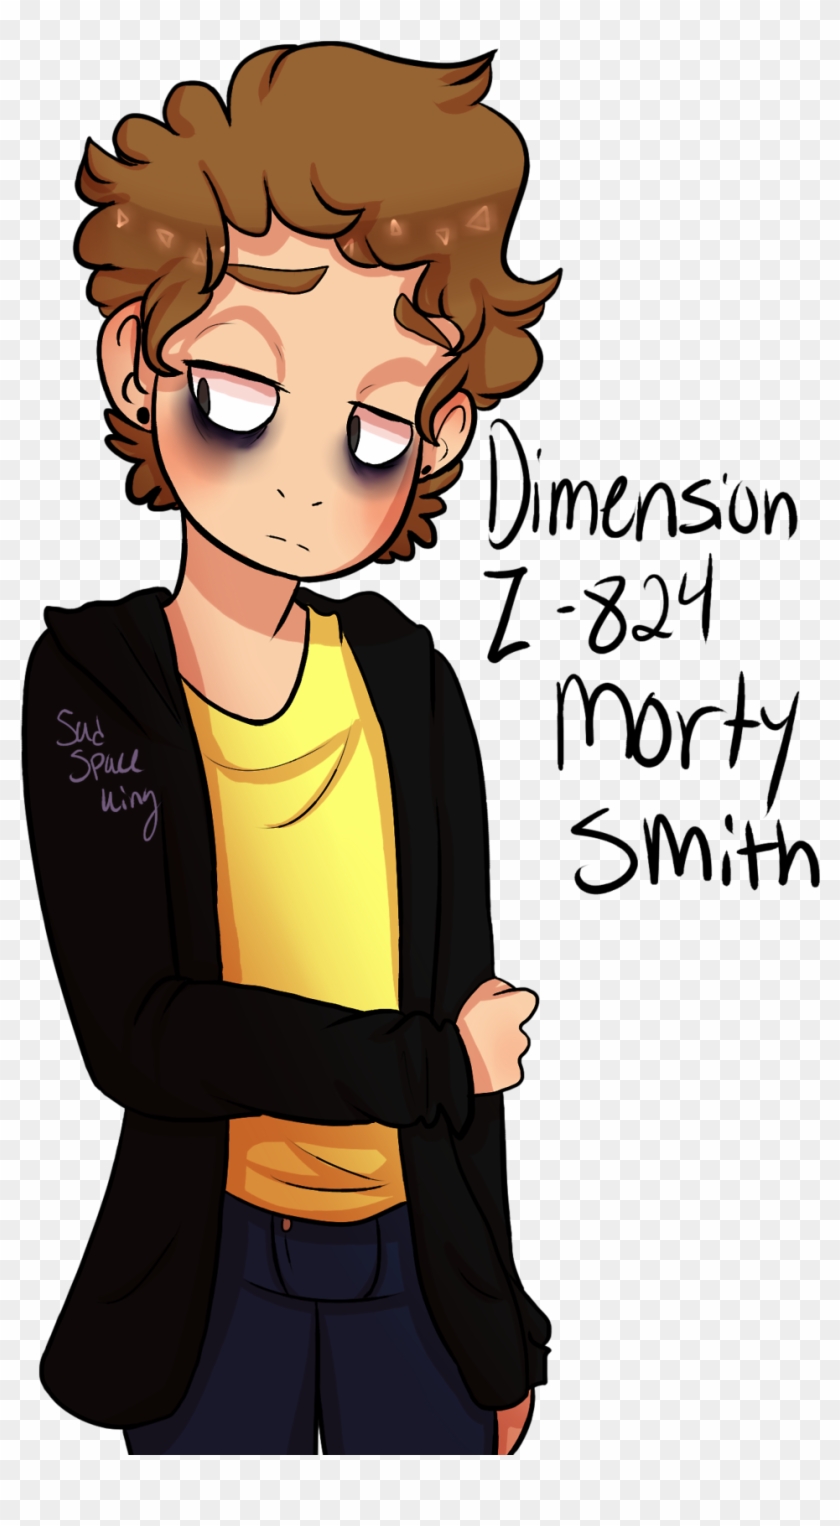 Sad Space King - Morty Smith Dimension 824 Clipart #3880104